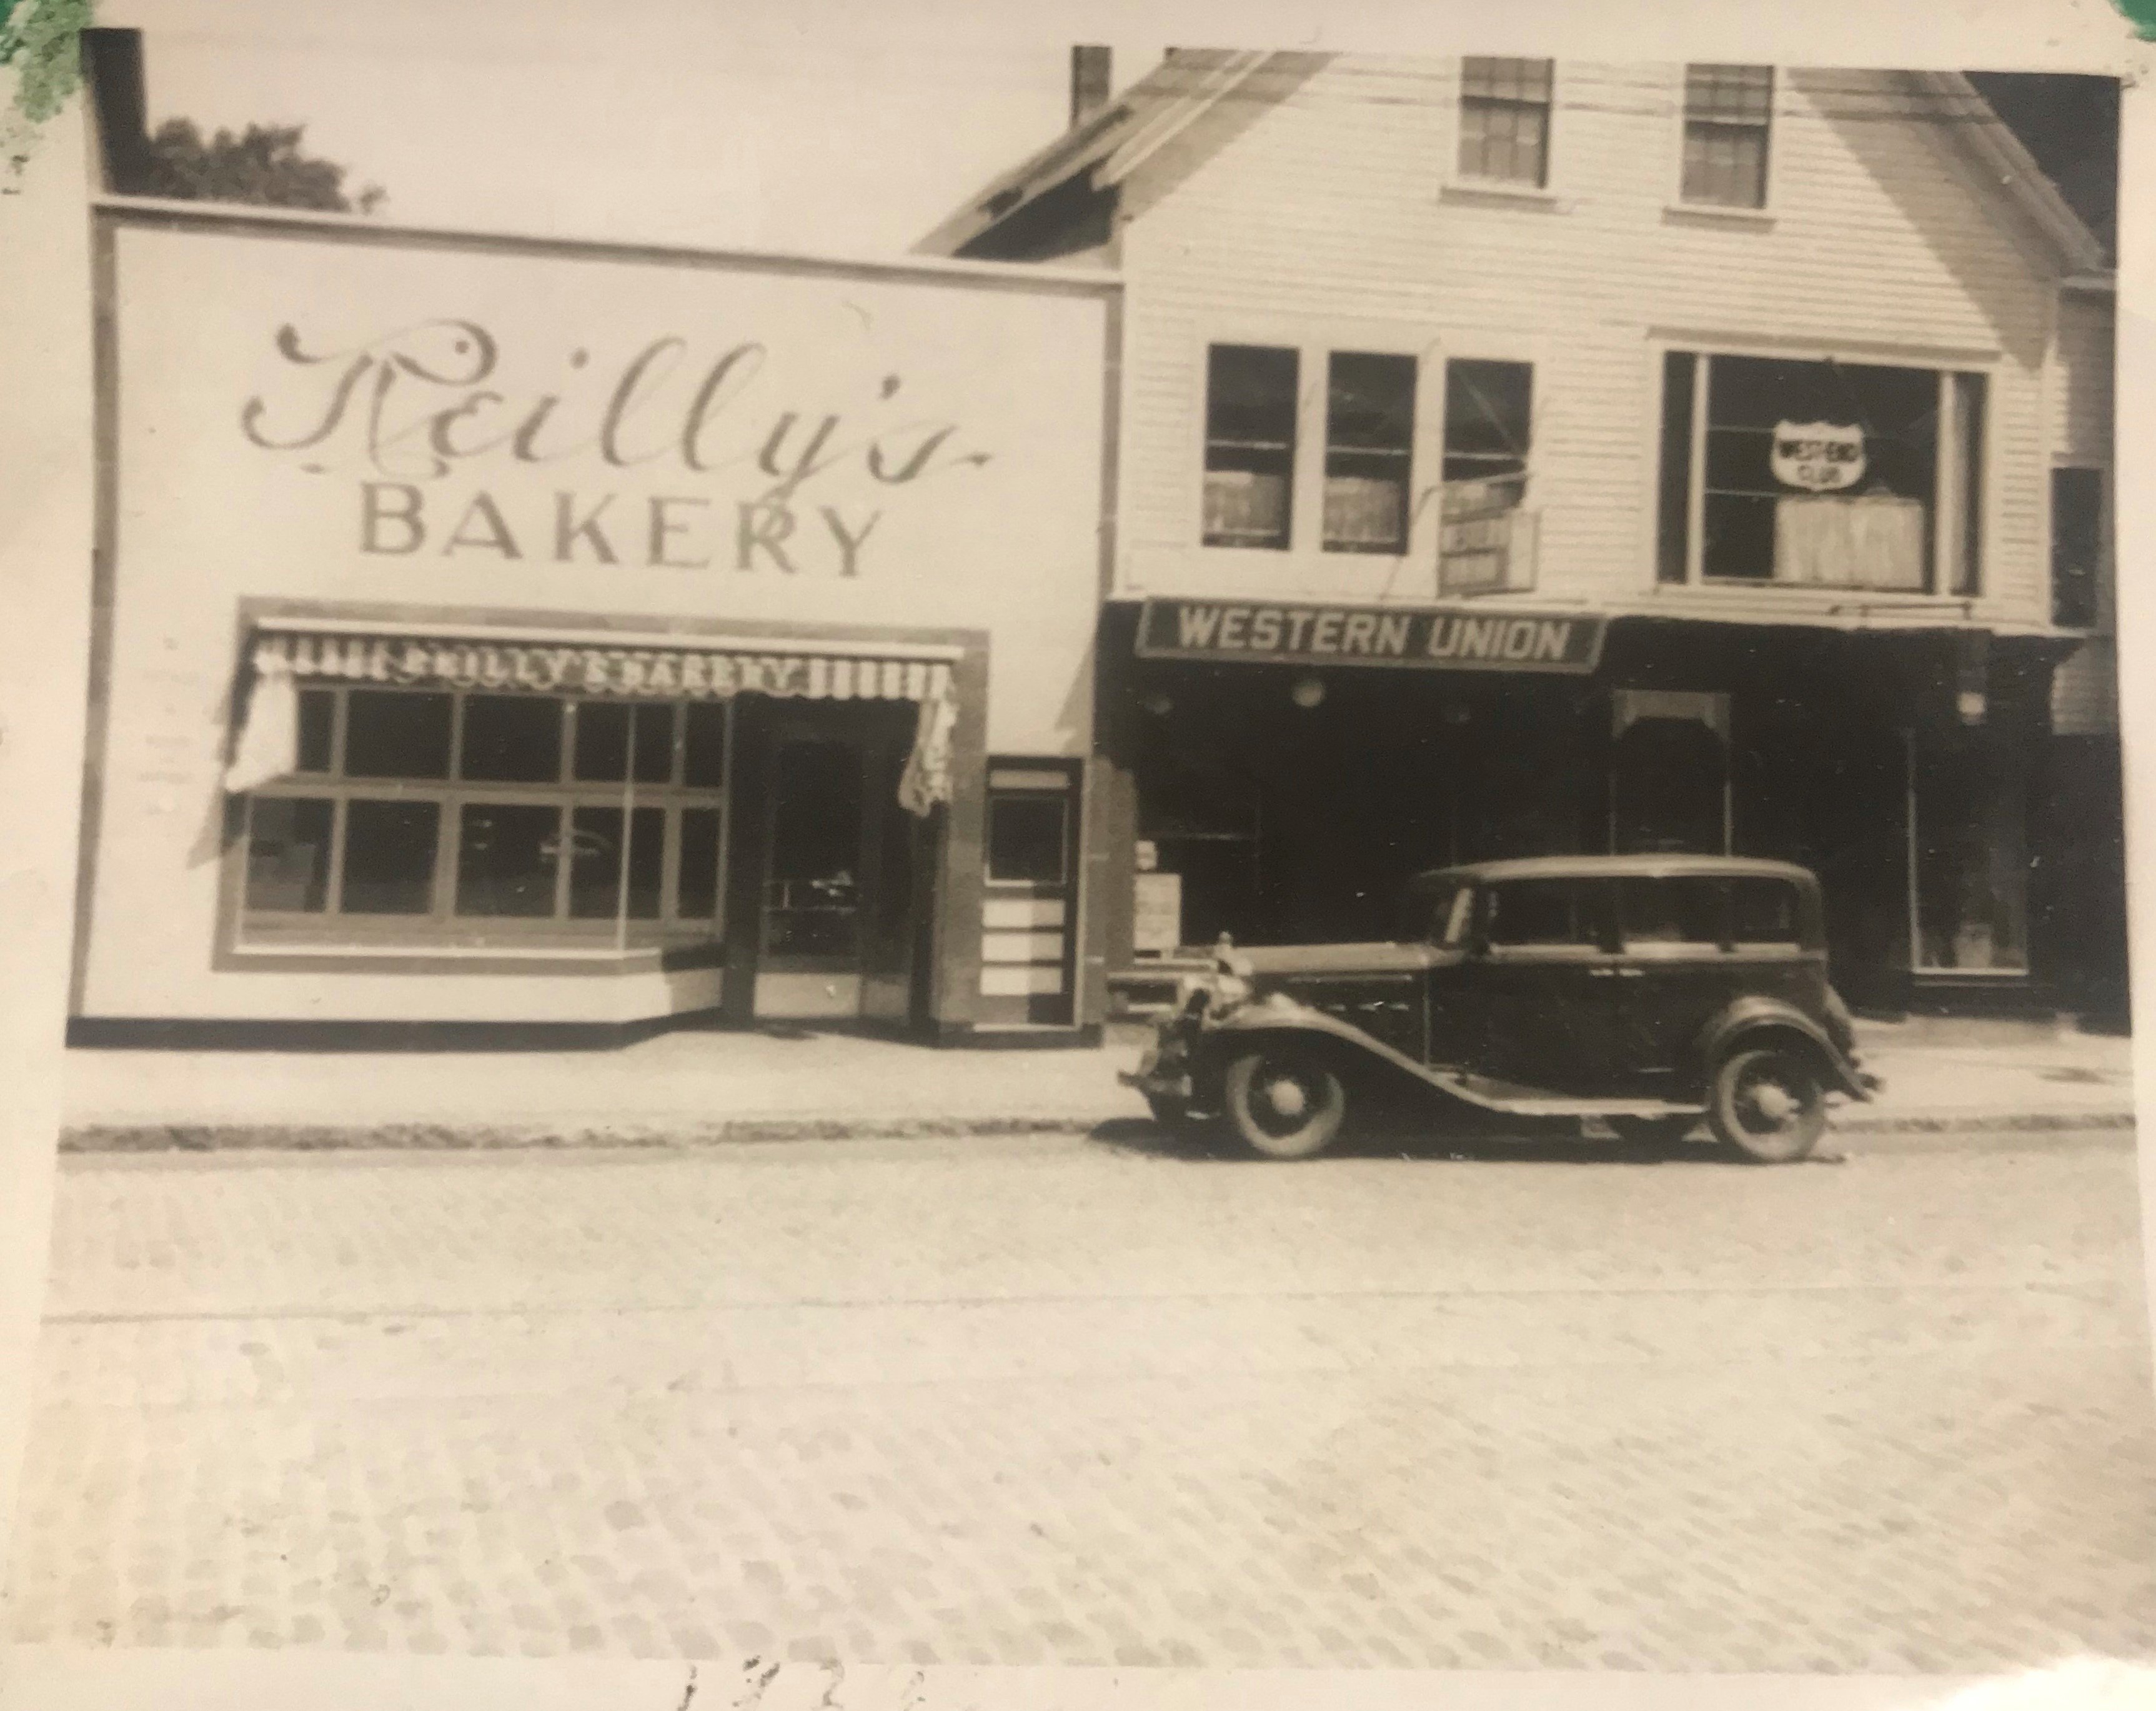 Old Photo of Reilly’s Bakery